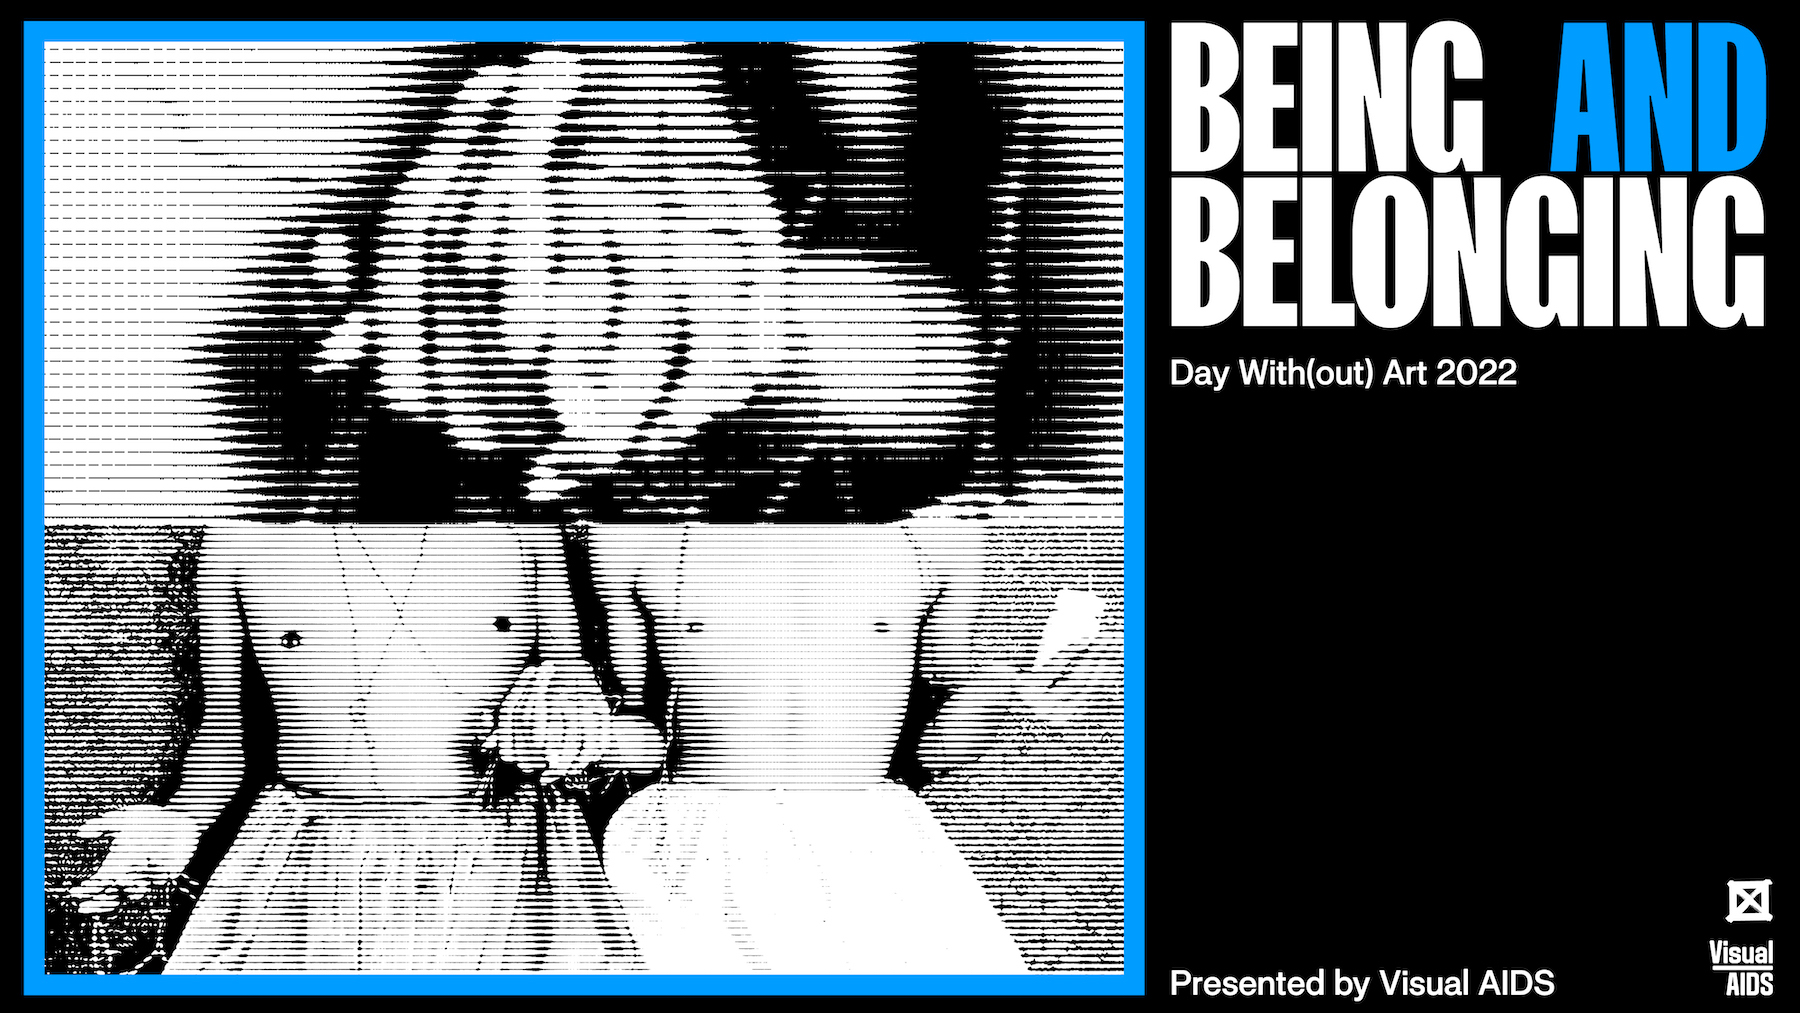 Film stills showing abstracted shapes and two people's torsos along with the words "Being and Belonging" "Day with(out) Art 2022" "Presented by Visual AIDS"